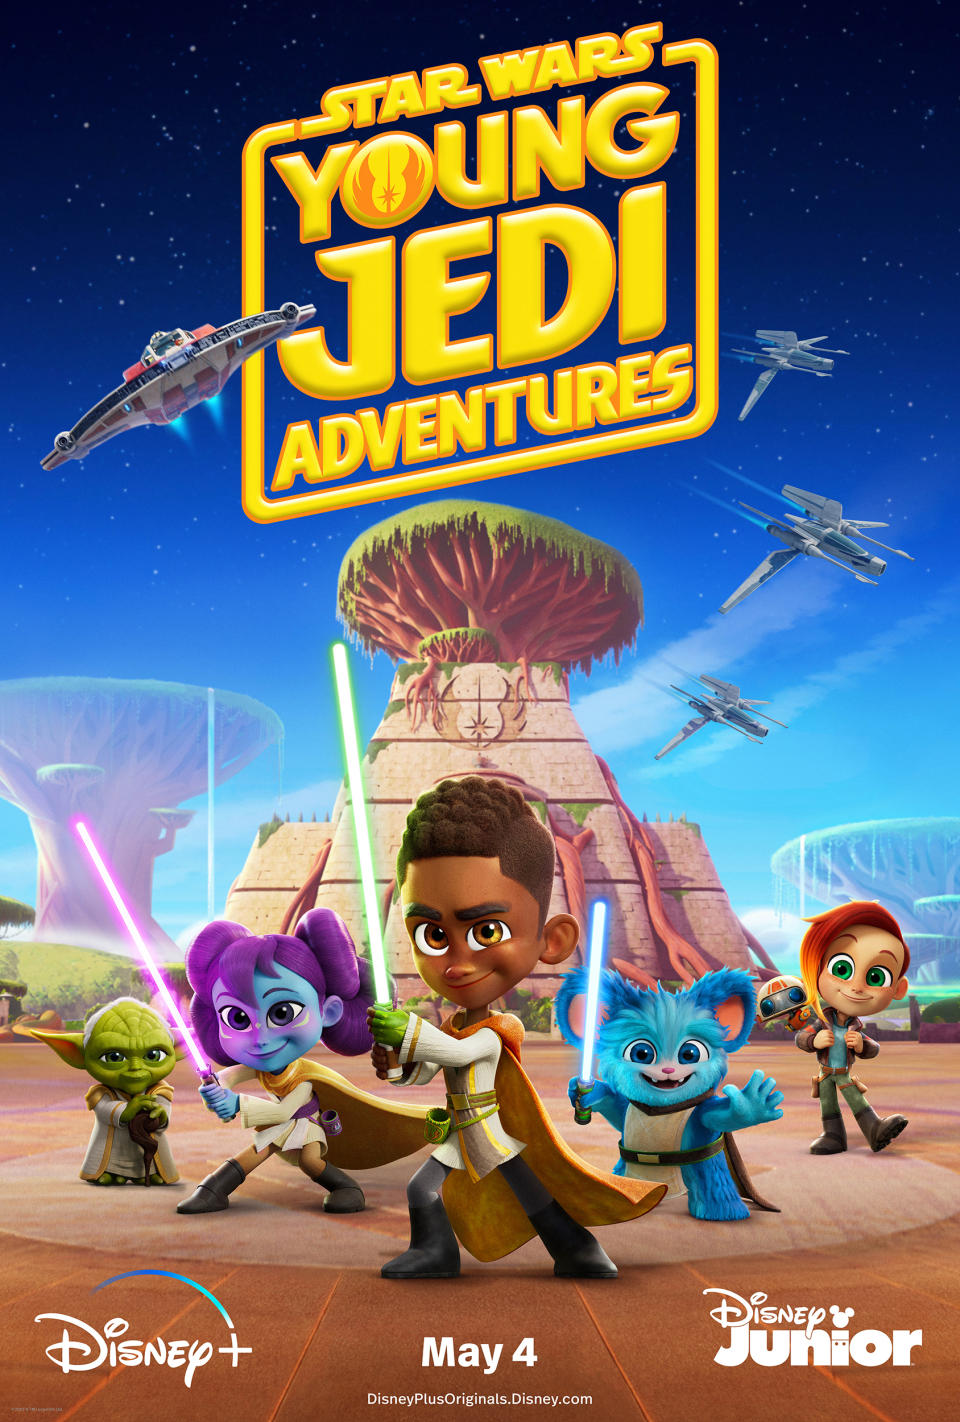 'Star Wars Young Jedi Adventures' Younglings now have an animated